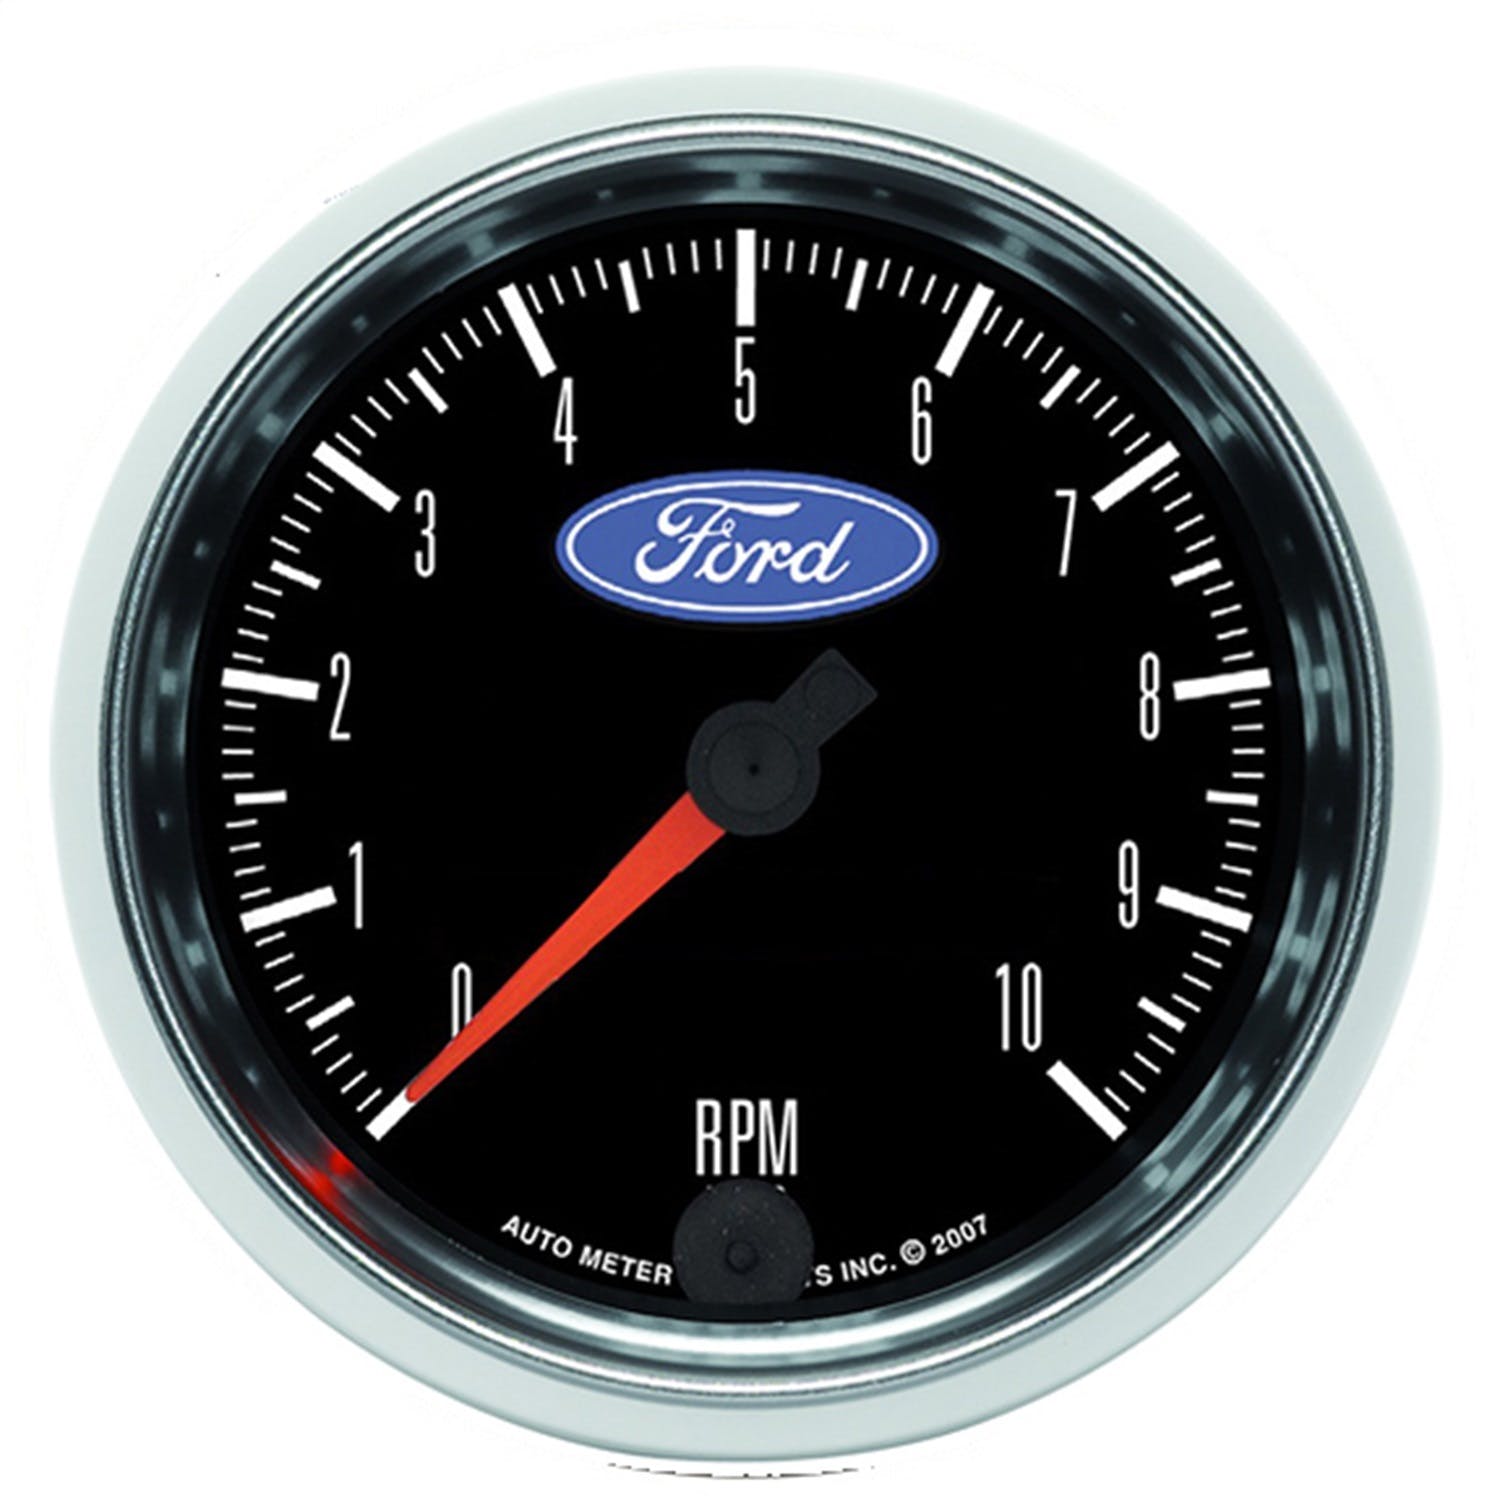 AutoMeter Products 880826 Tachometer Gauge, 3 3/8, 10K RPM, In-Dash, Ford